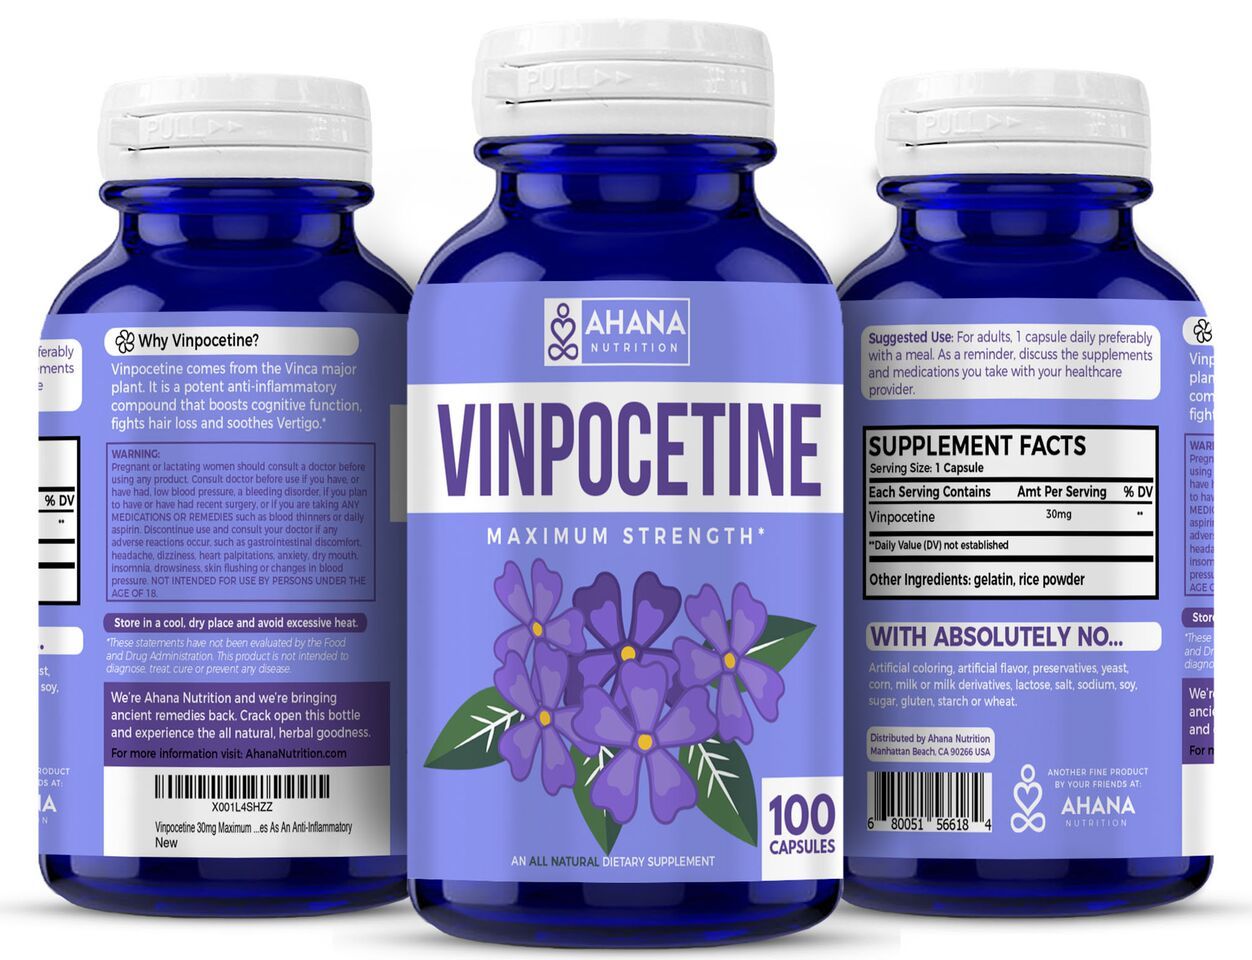 Vinpocetine powder is known for zero side effects